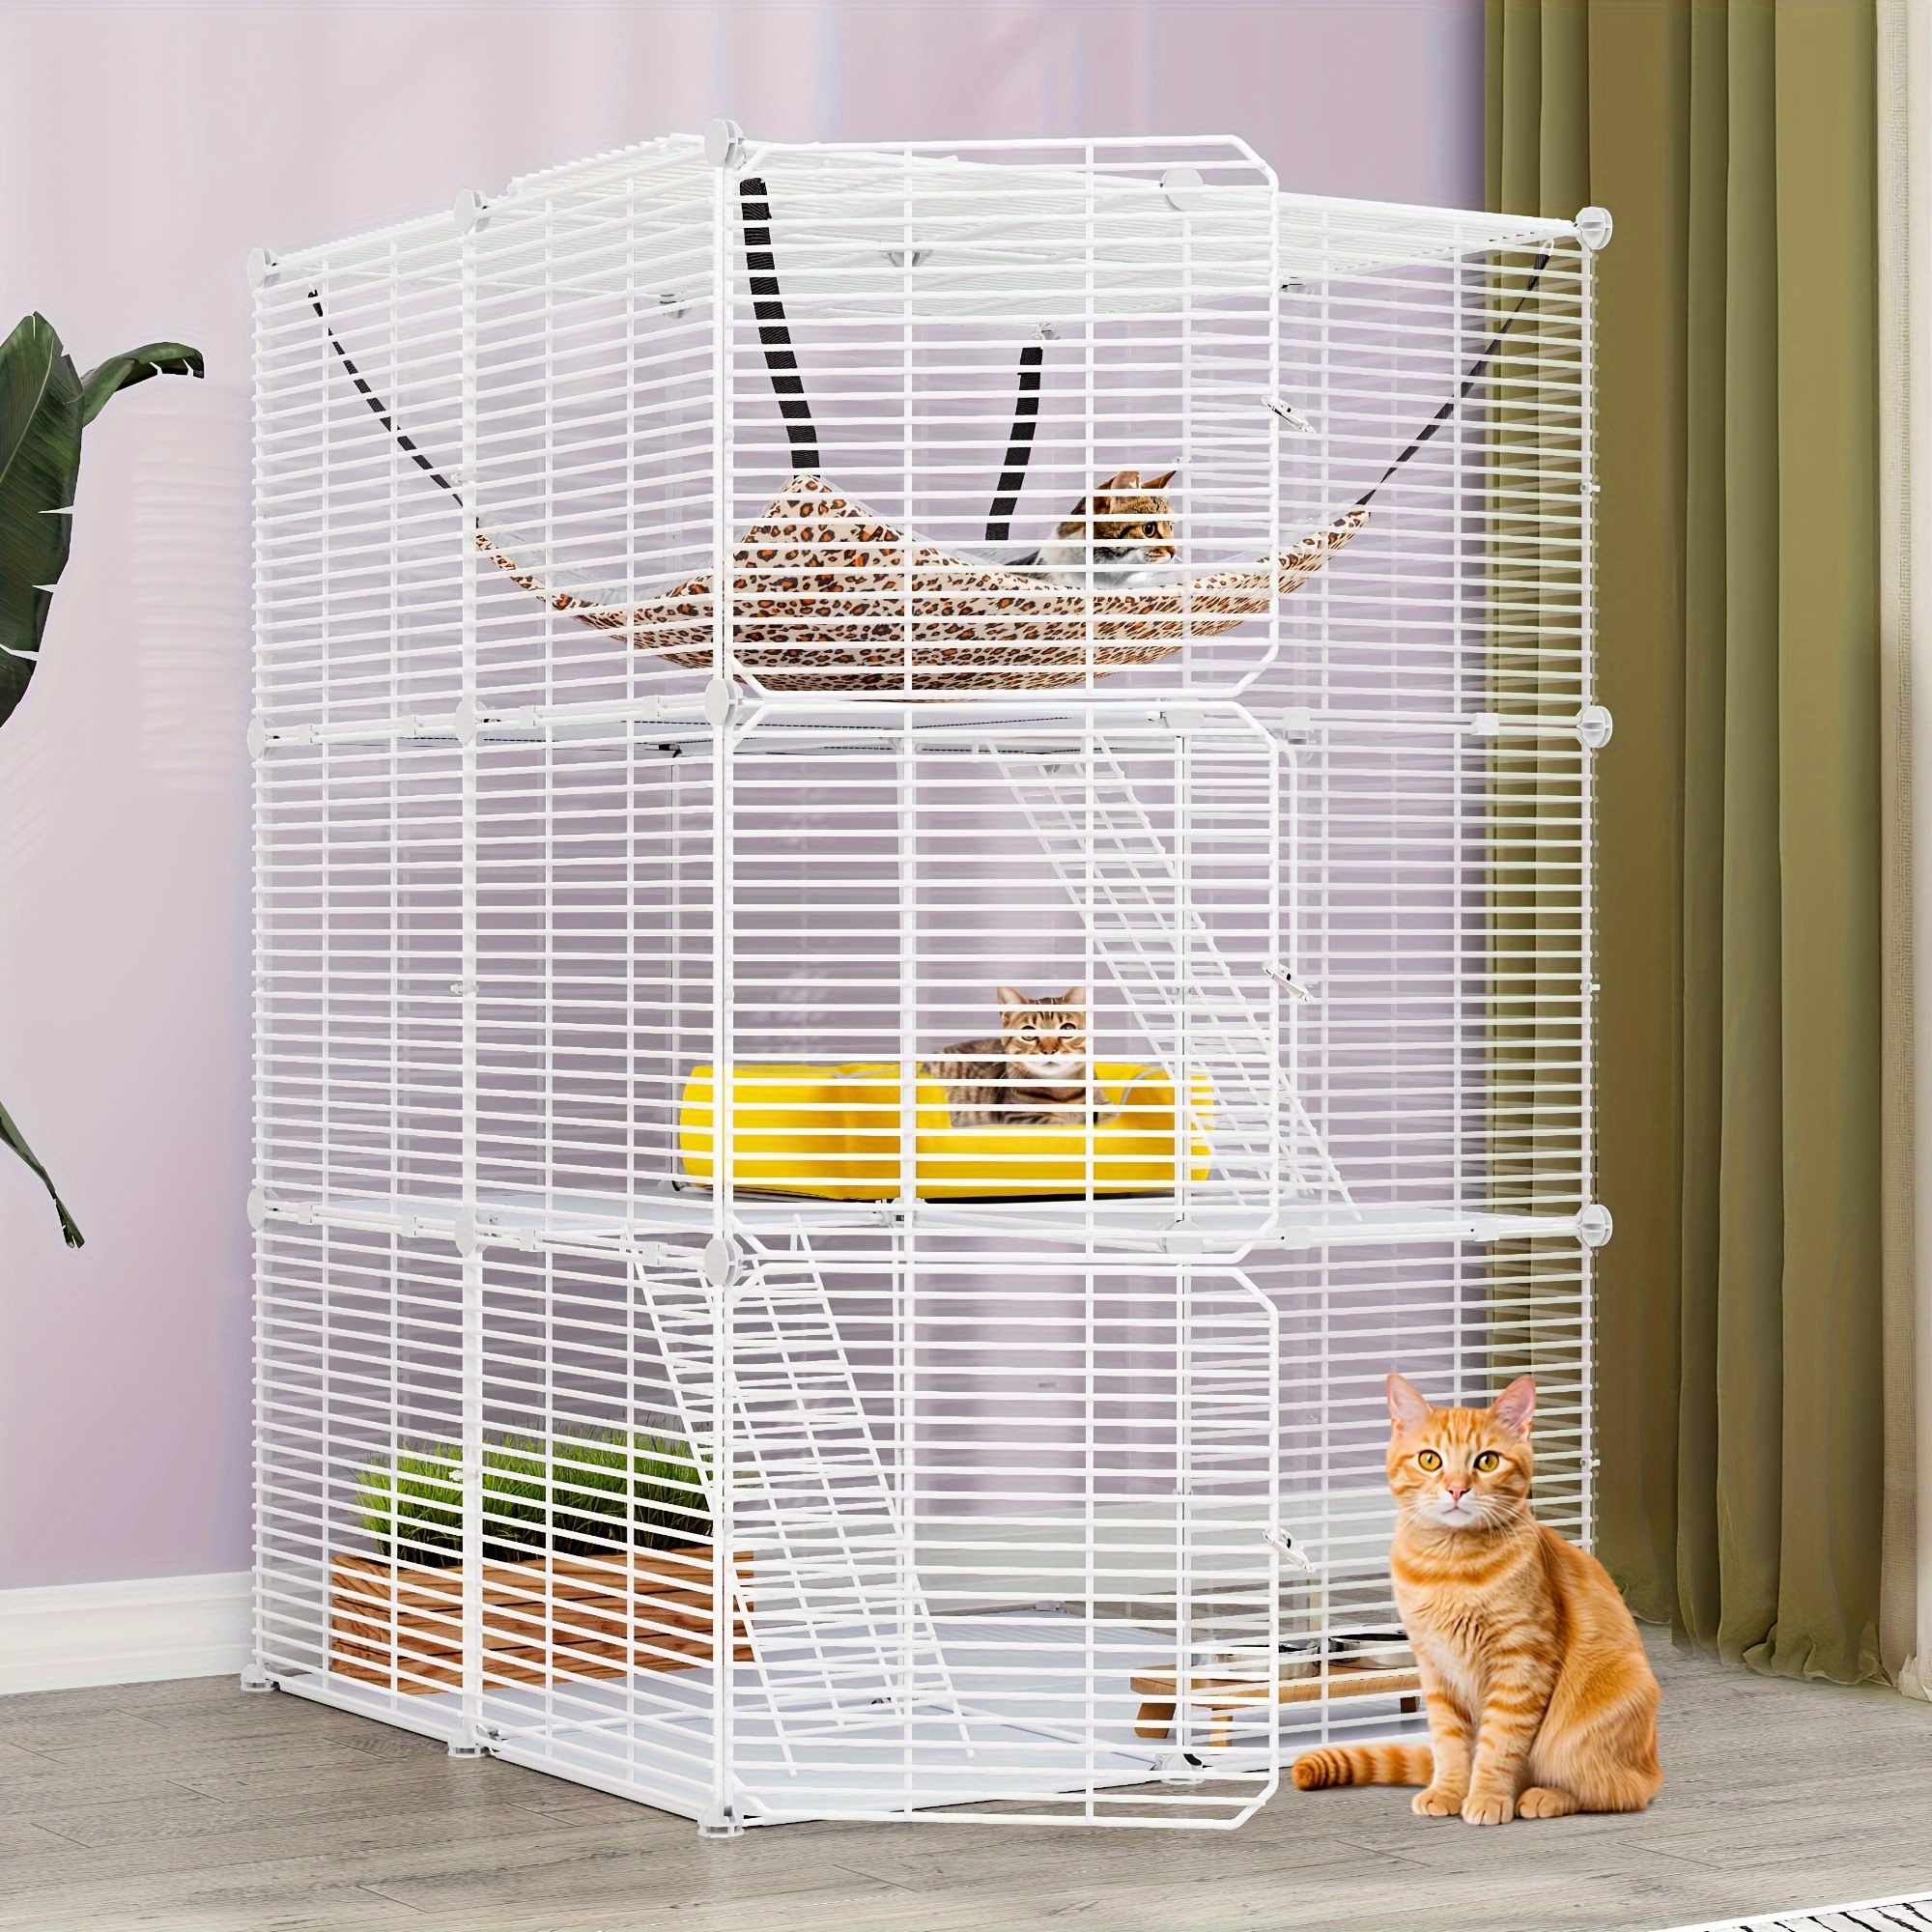 

Yarsca Cat Cage Indoor Cat Enclosures Diy Cat Playpen Metal Kennel With Extra Large Hammock For 1-2 Cats, Ferret, Chinchilla, Rabbit, Small Animals White